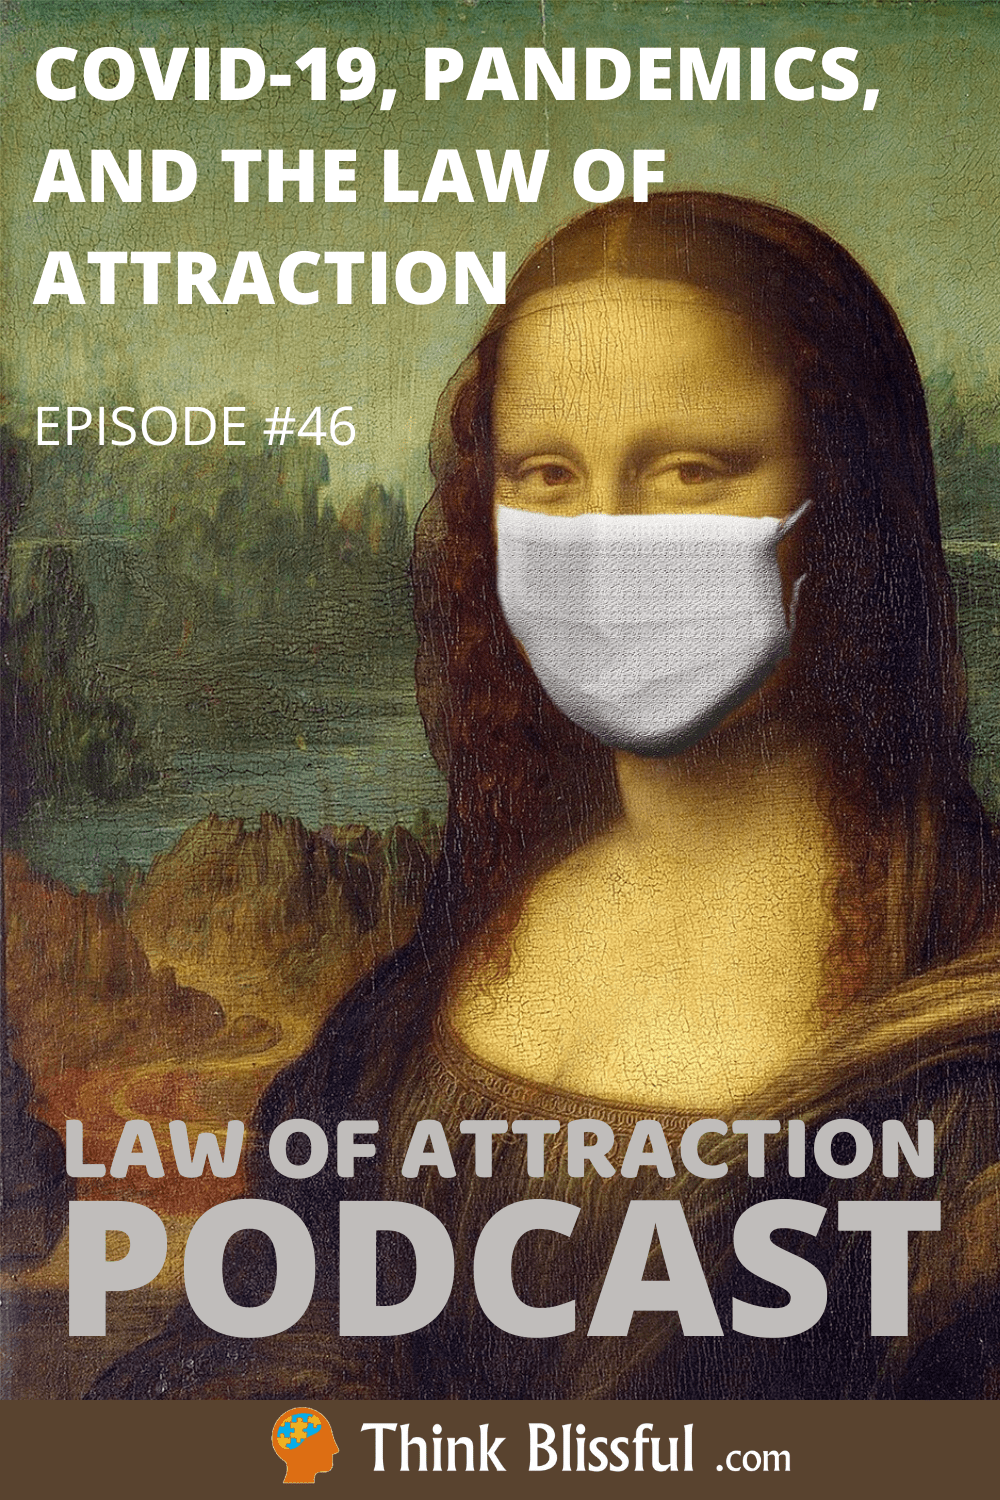 The Law Of Attraction And Covid-19